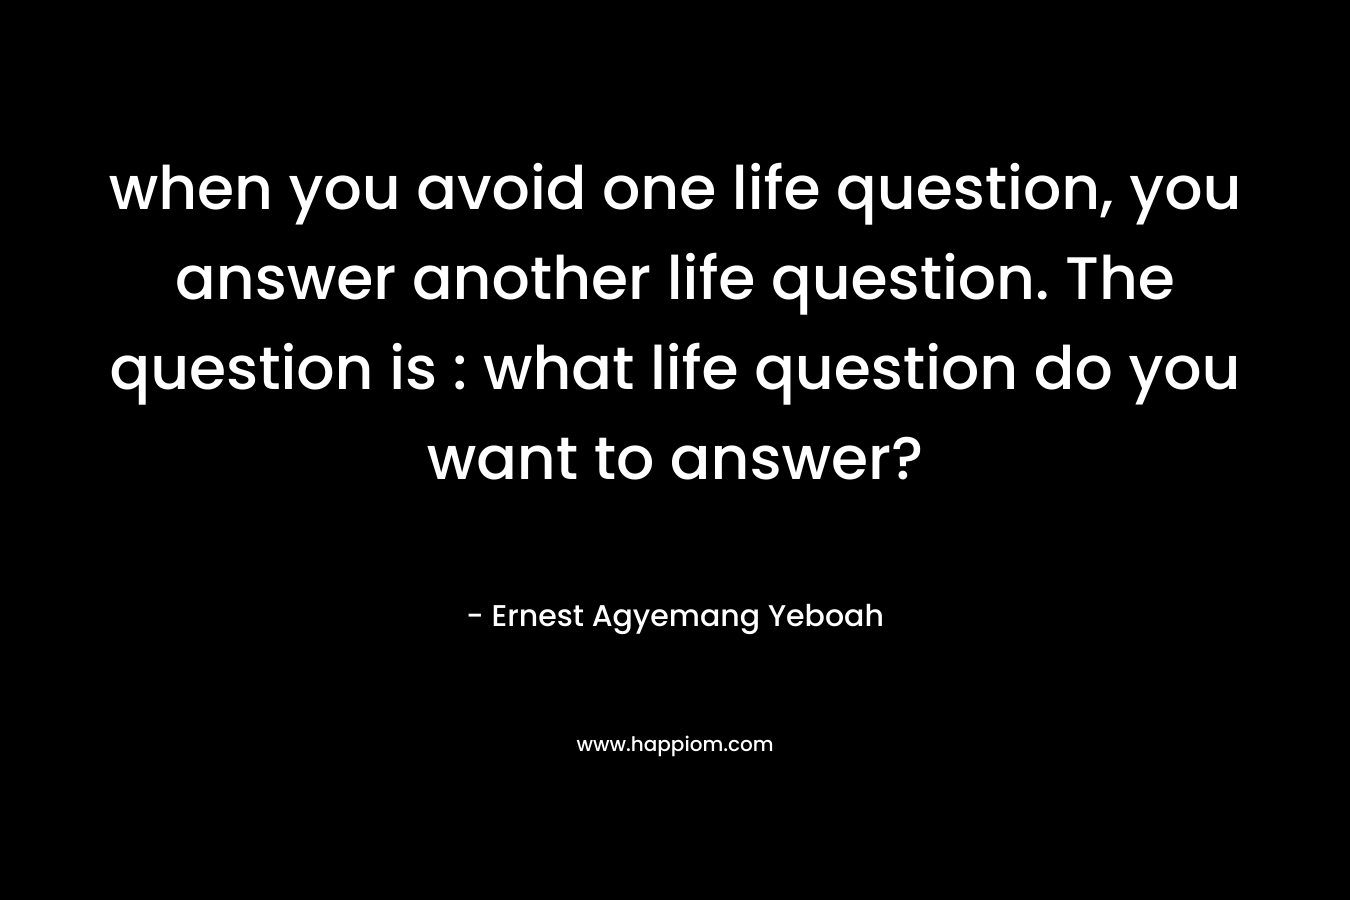 when you avoid one life question, you answer another life question. The question is : what life question do you want to answer? – Ernest Agyemang Yeboah